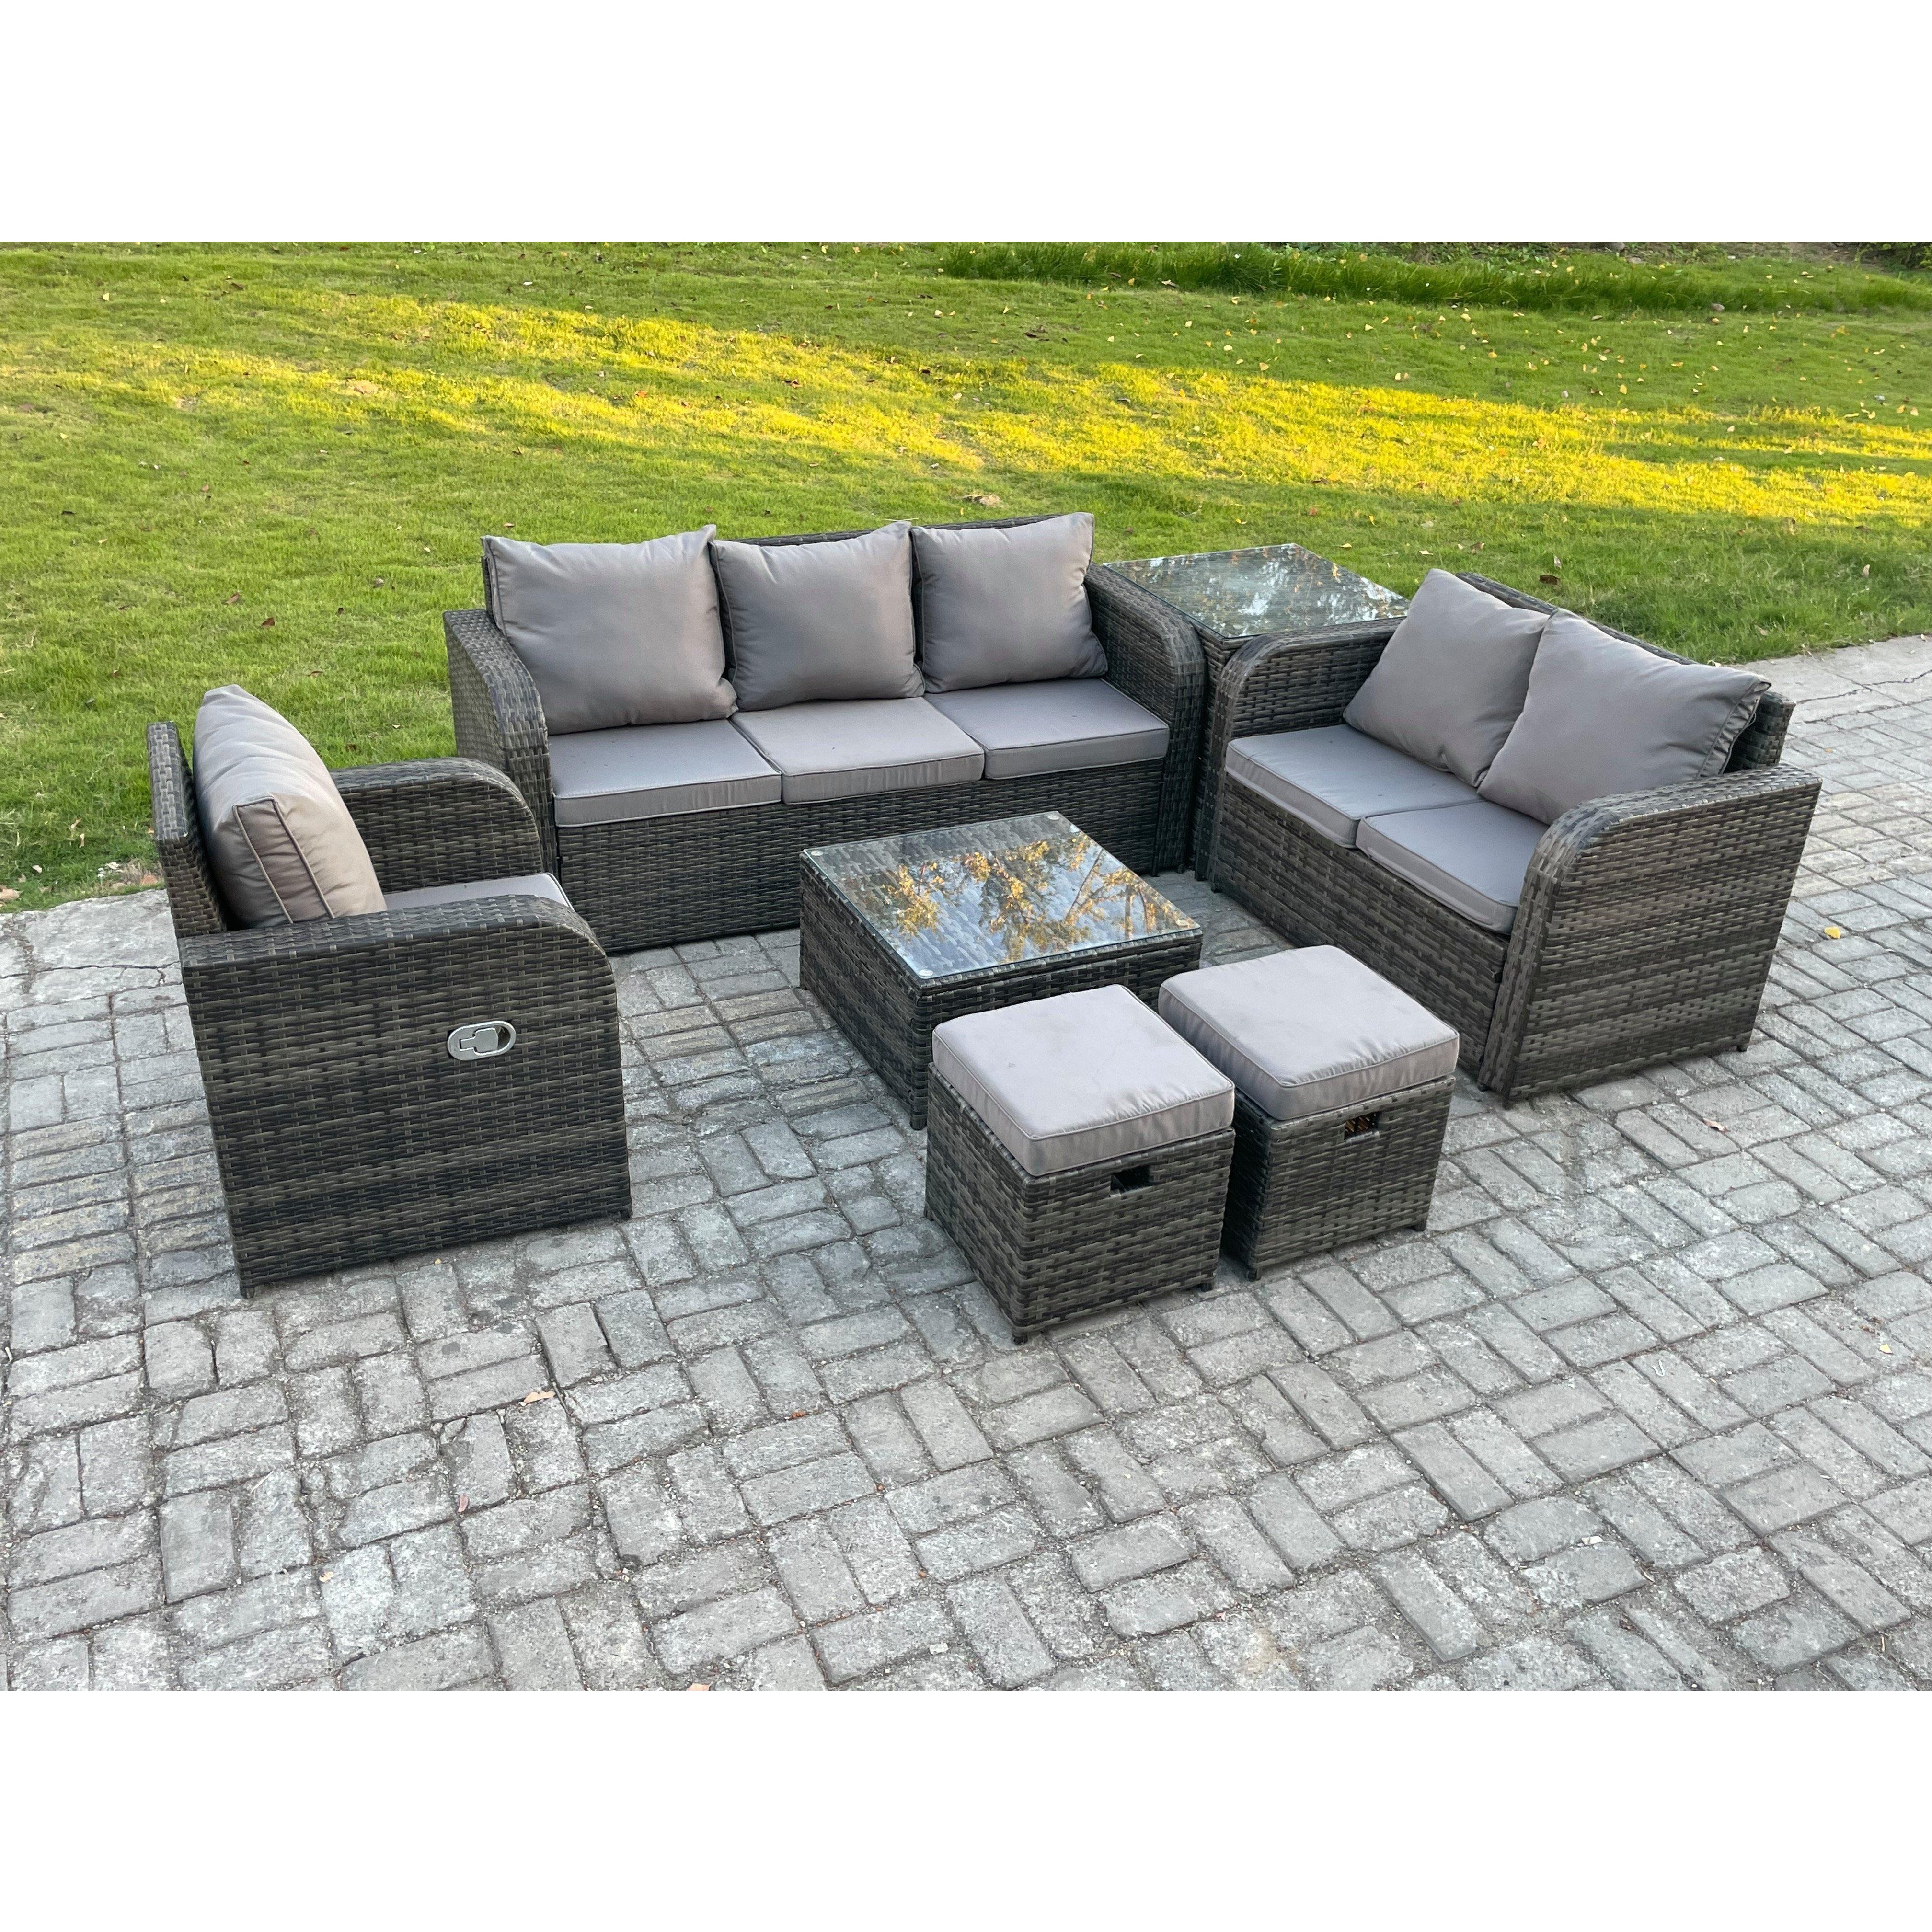 Rattan Garden Furniture 7 Piece Patio Set With Table Sofa Square Coffee Table Reclining Chair Love seat sofa Side Table - image 1